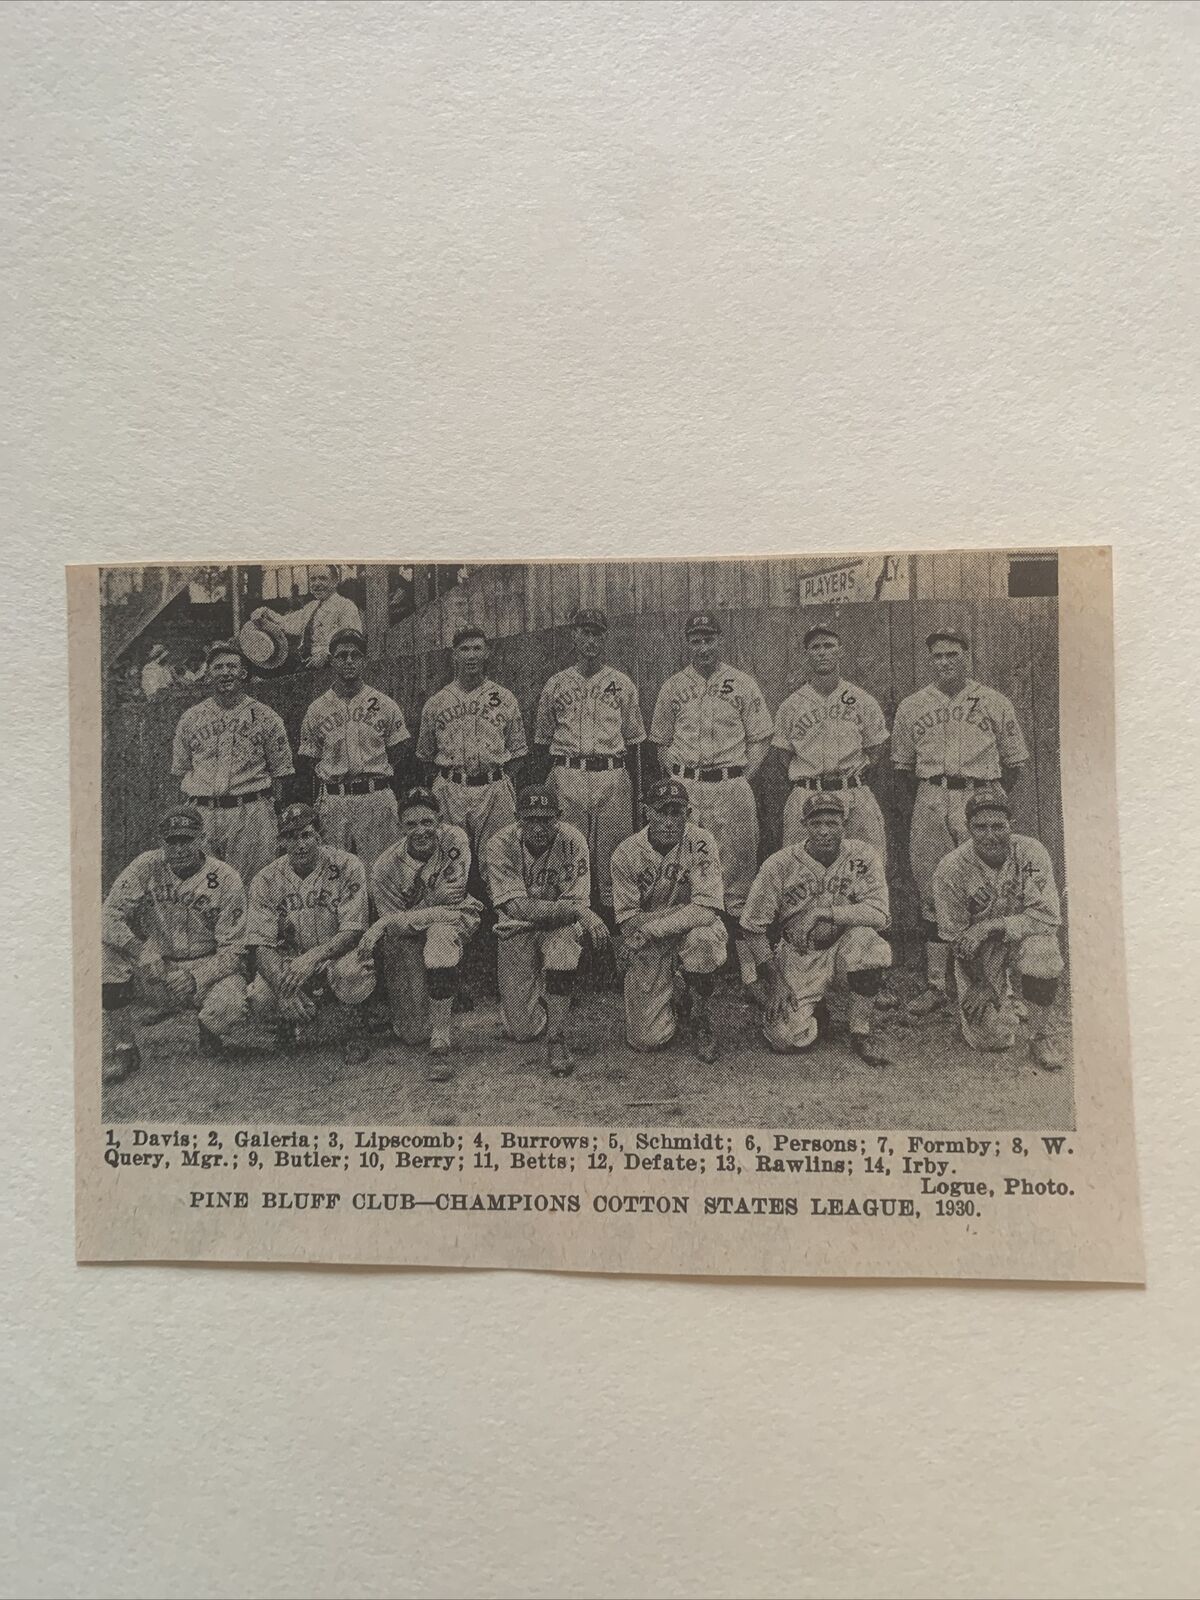 Pine Bluff Judges Cotton States League Tony DeFate 1930 Baseball Team Picture #2